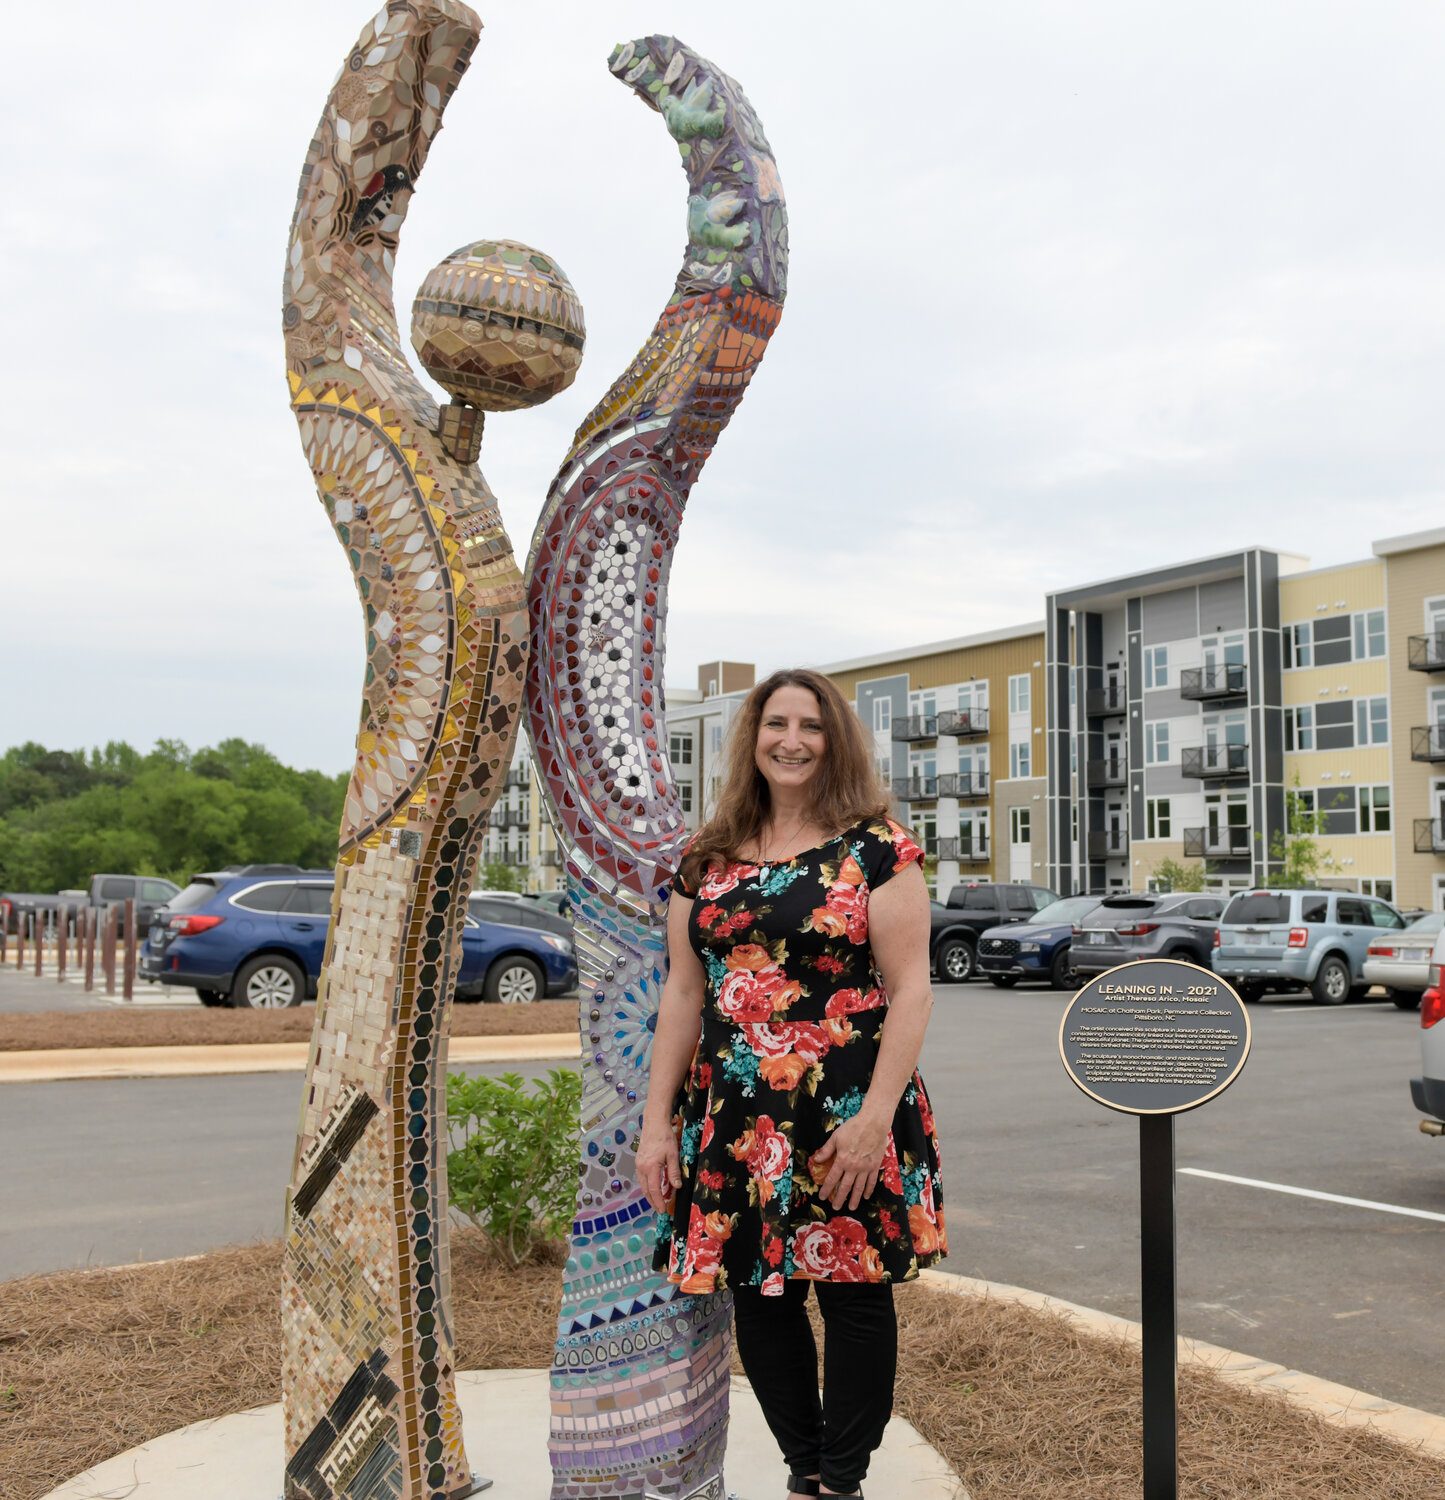 Theresa Arico, well known artist and sculptur of N.C., crafted the new interactive sculpture 'Leaning In,'  that can be found in front of The Guild.